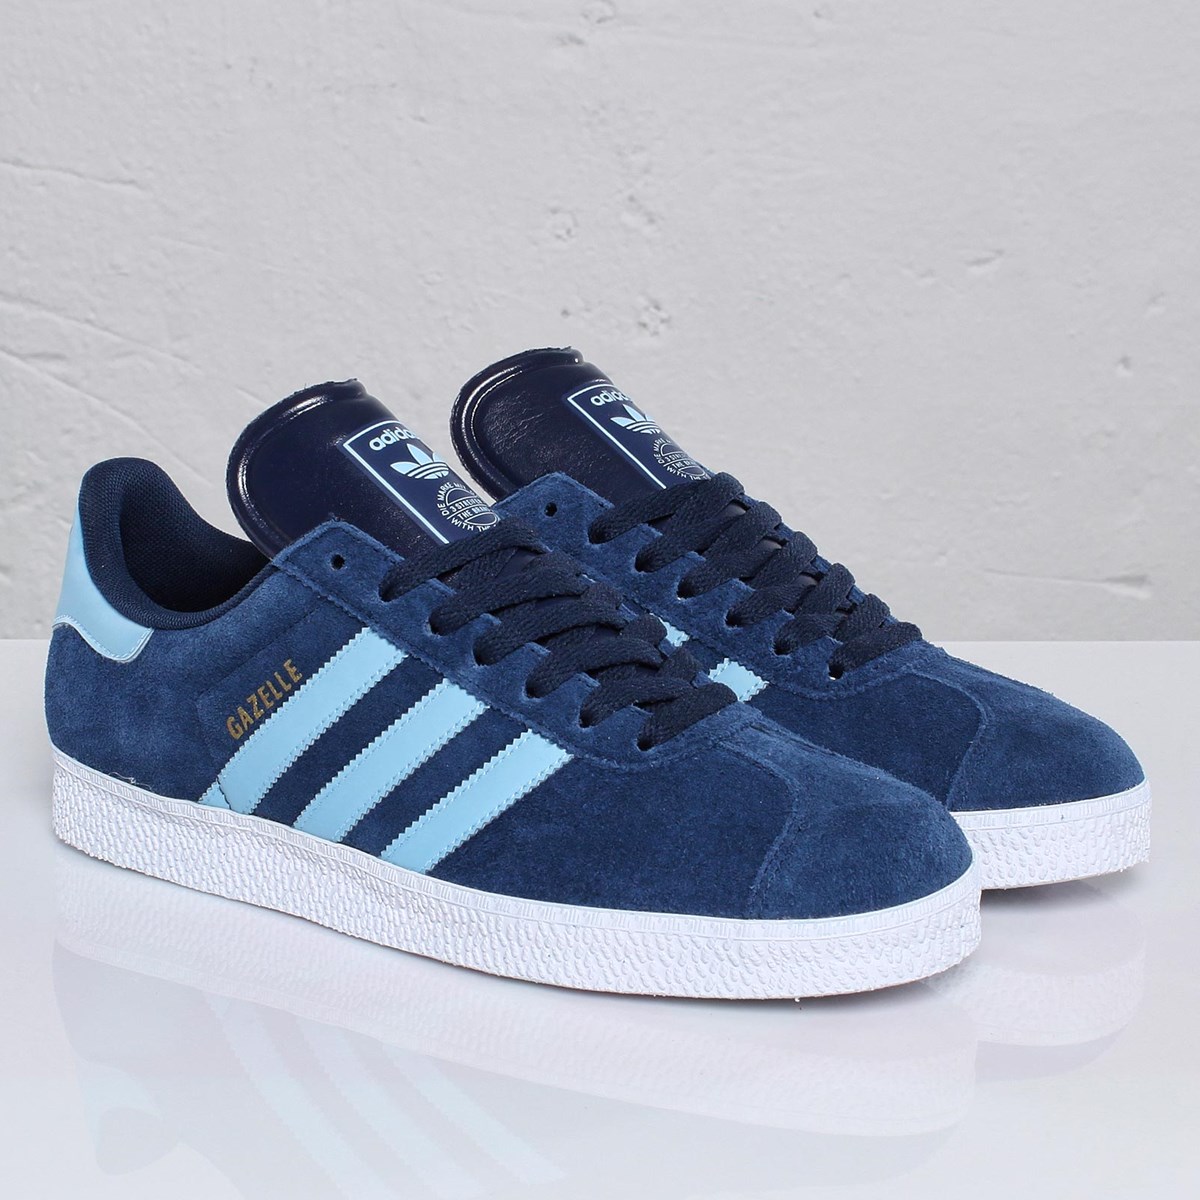 priscilla page on Twitter: "thinking about Skyfall and how I've wanted these Adidas Gazelle 2 sneakers (in indigo with Argentina blue stripes) forever that Bond briefly wears in the film. never